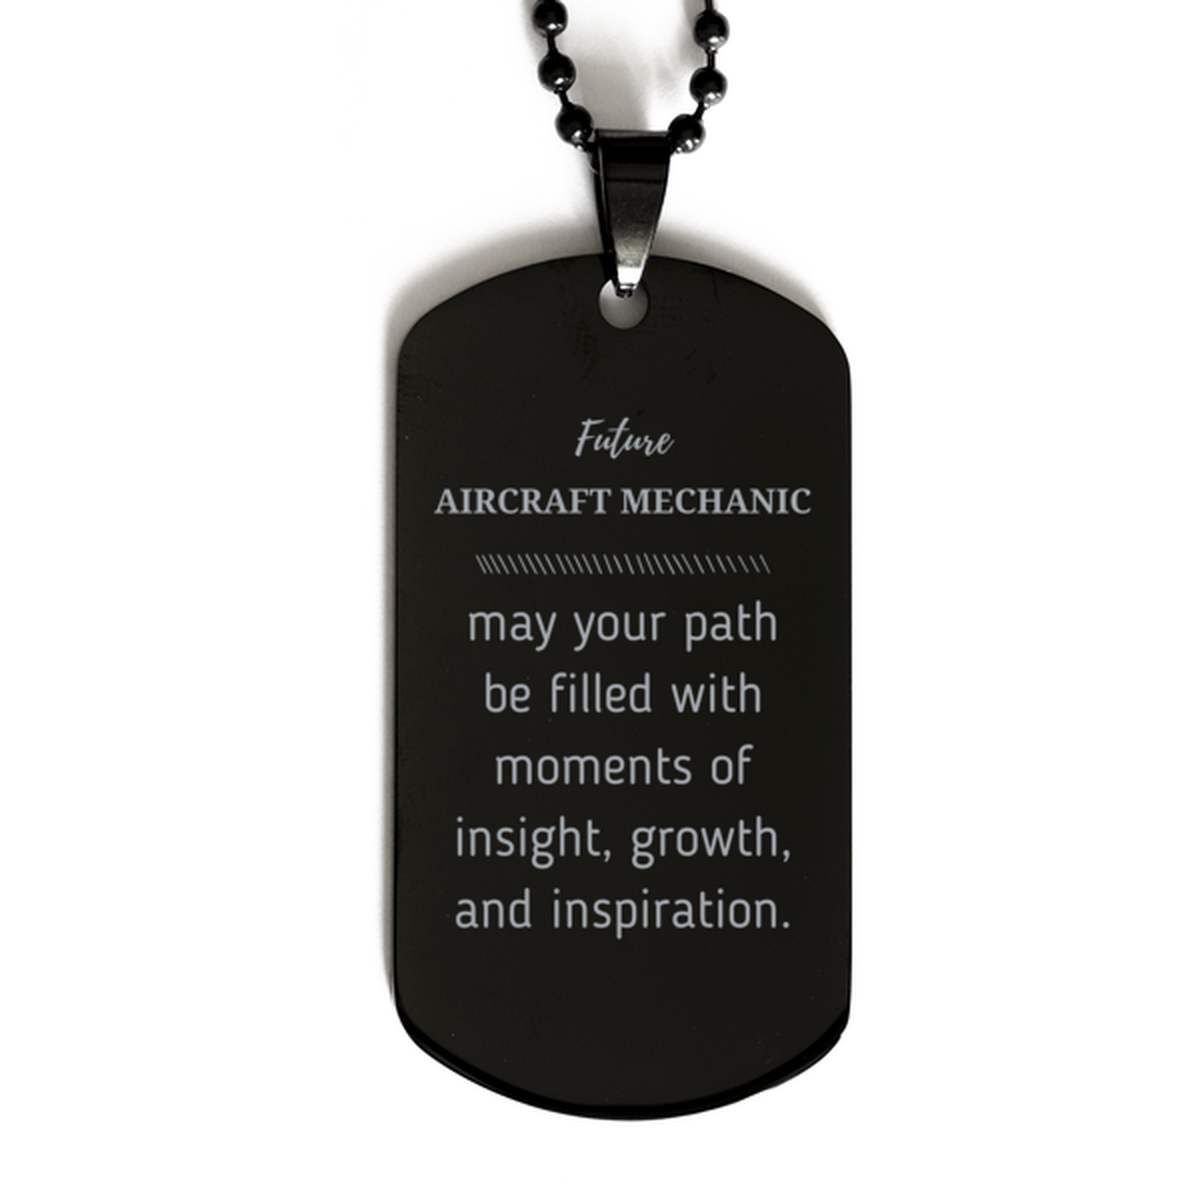 Future Aircraft Mechanic Gifts, May your path be filled with moments of insight, Graduation Gifts for New Aircraft Mechanic, Christmas Unique Black Dog Tag For Men, Women, Friends